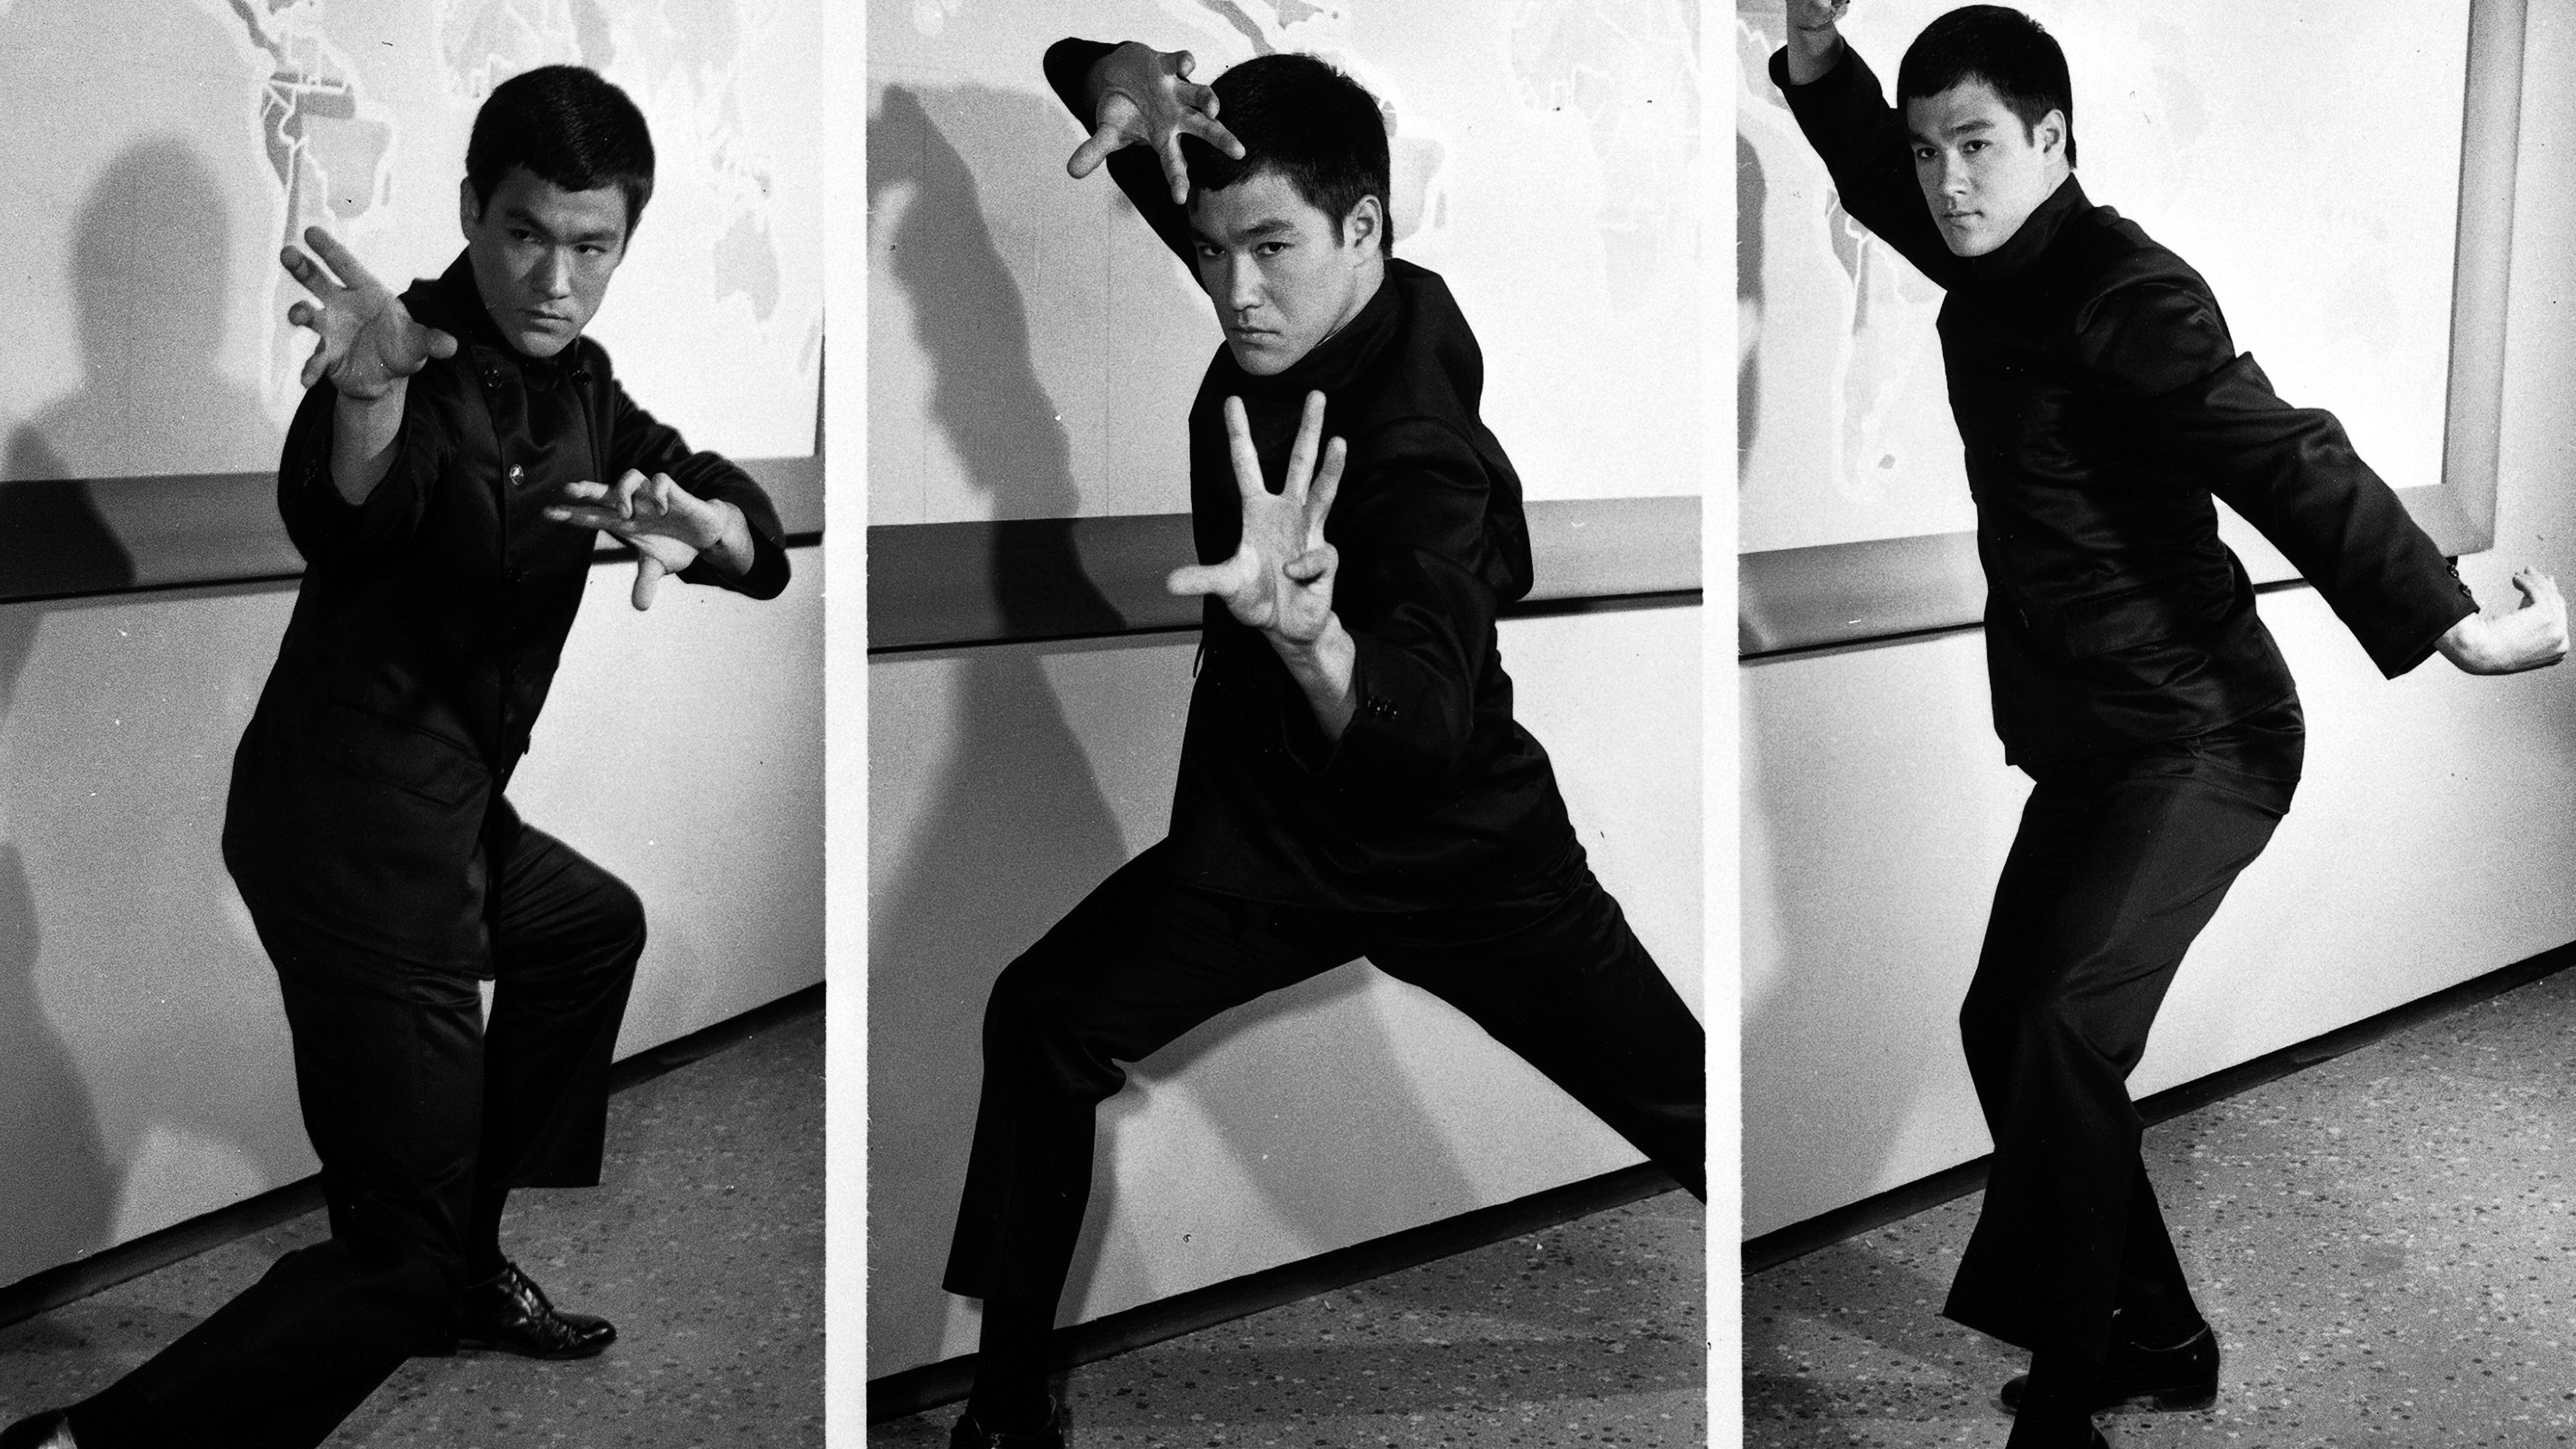 Bruce Lee is the focus of A Life in Ten Pictures on BBC2 tonight